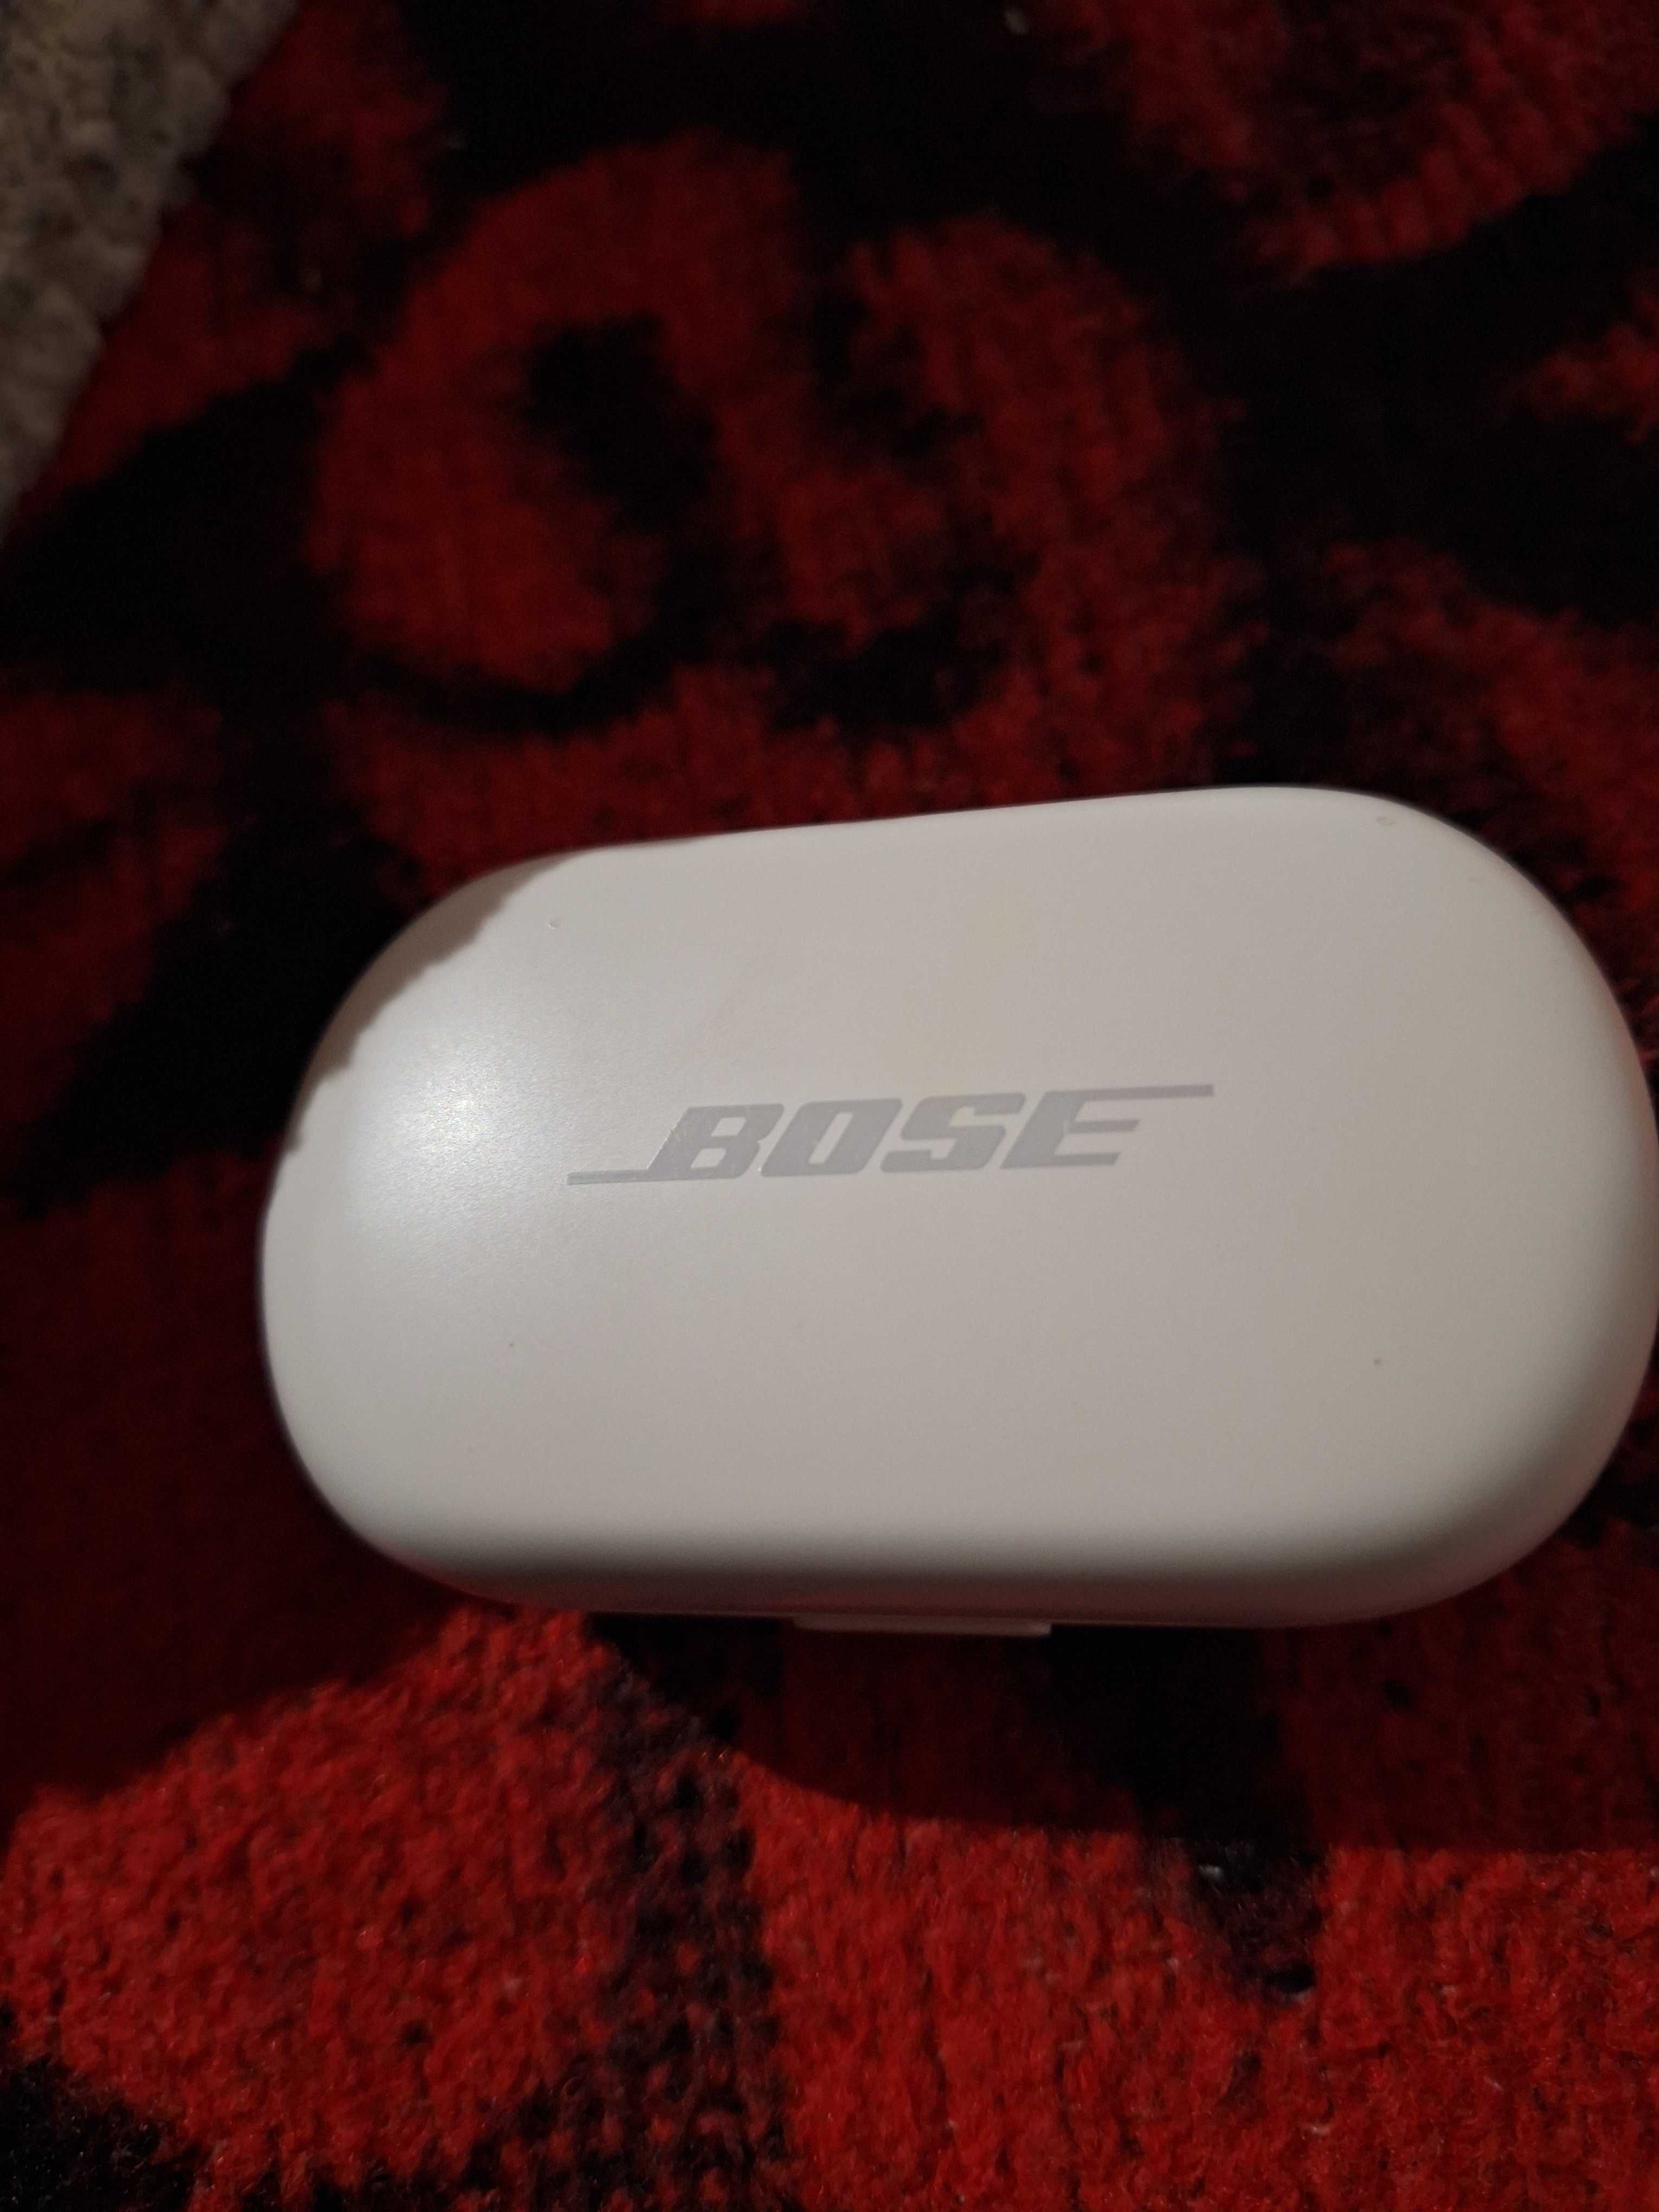 Bose qiute comfort with invoice and box